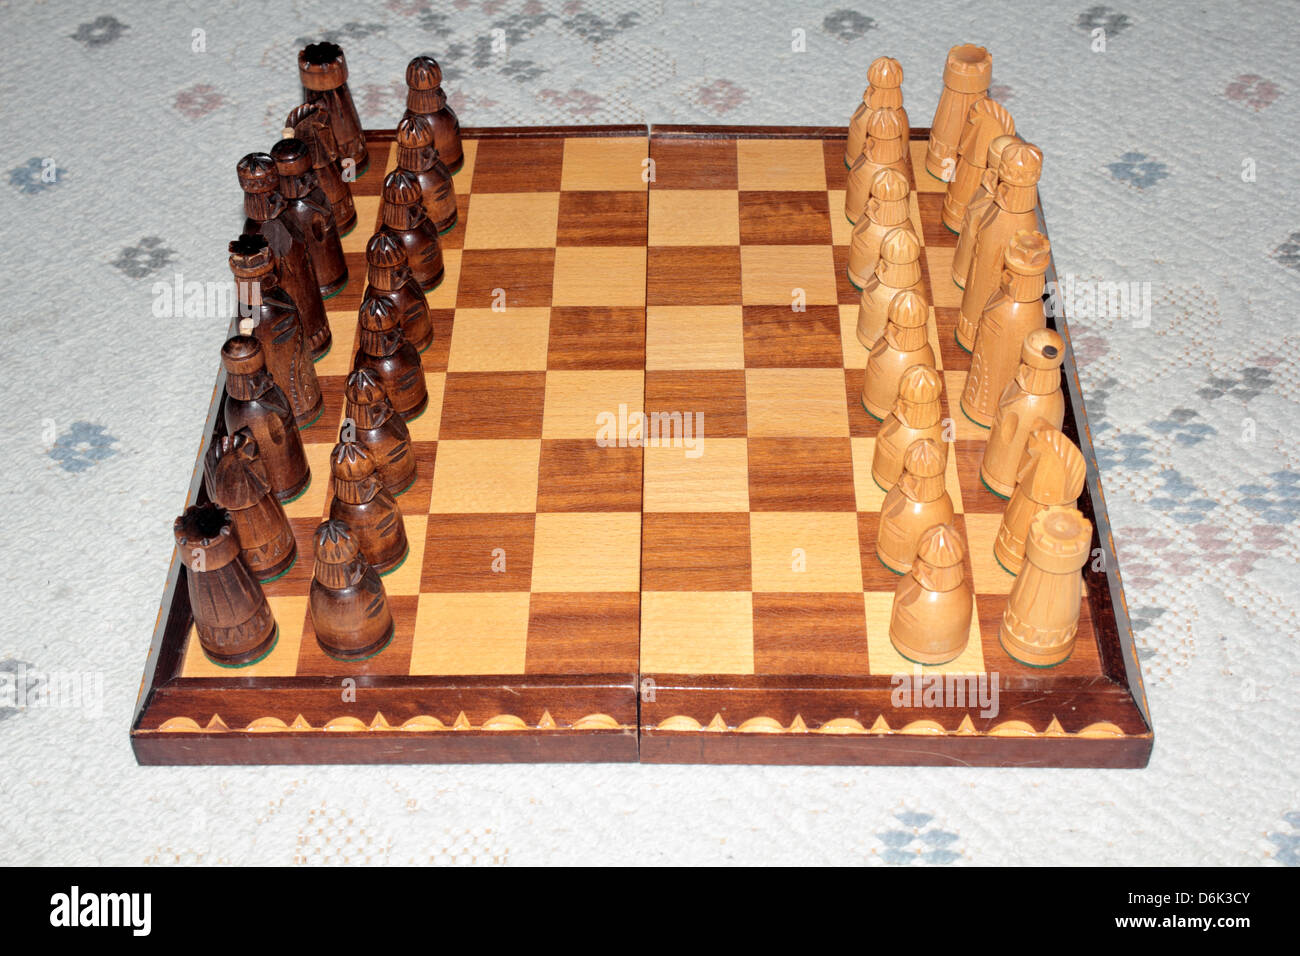 This is a chessboard with all the chess pieces set up in full battle array. Stock Photo